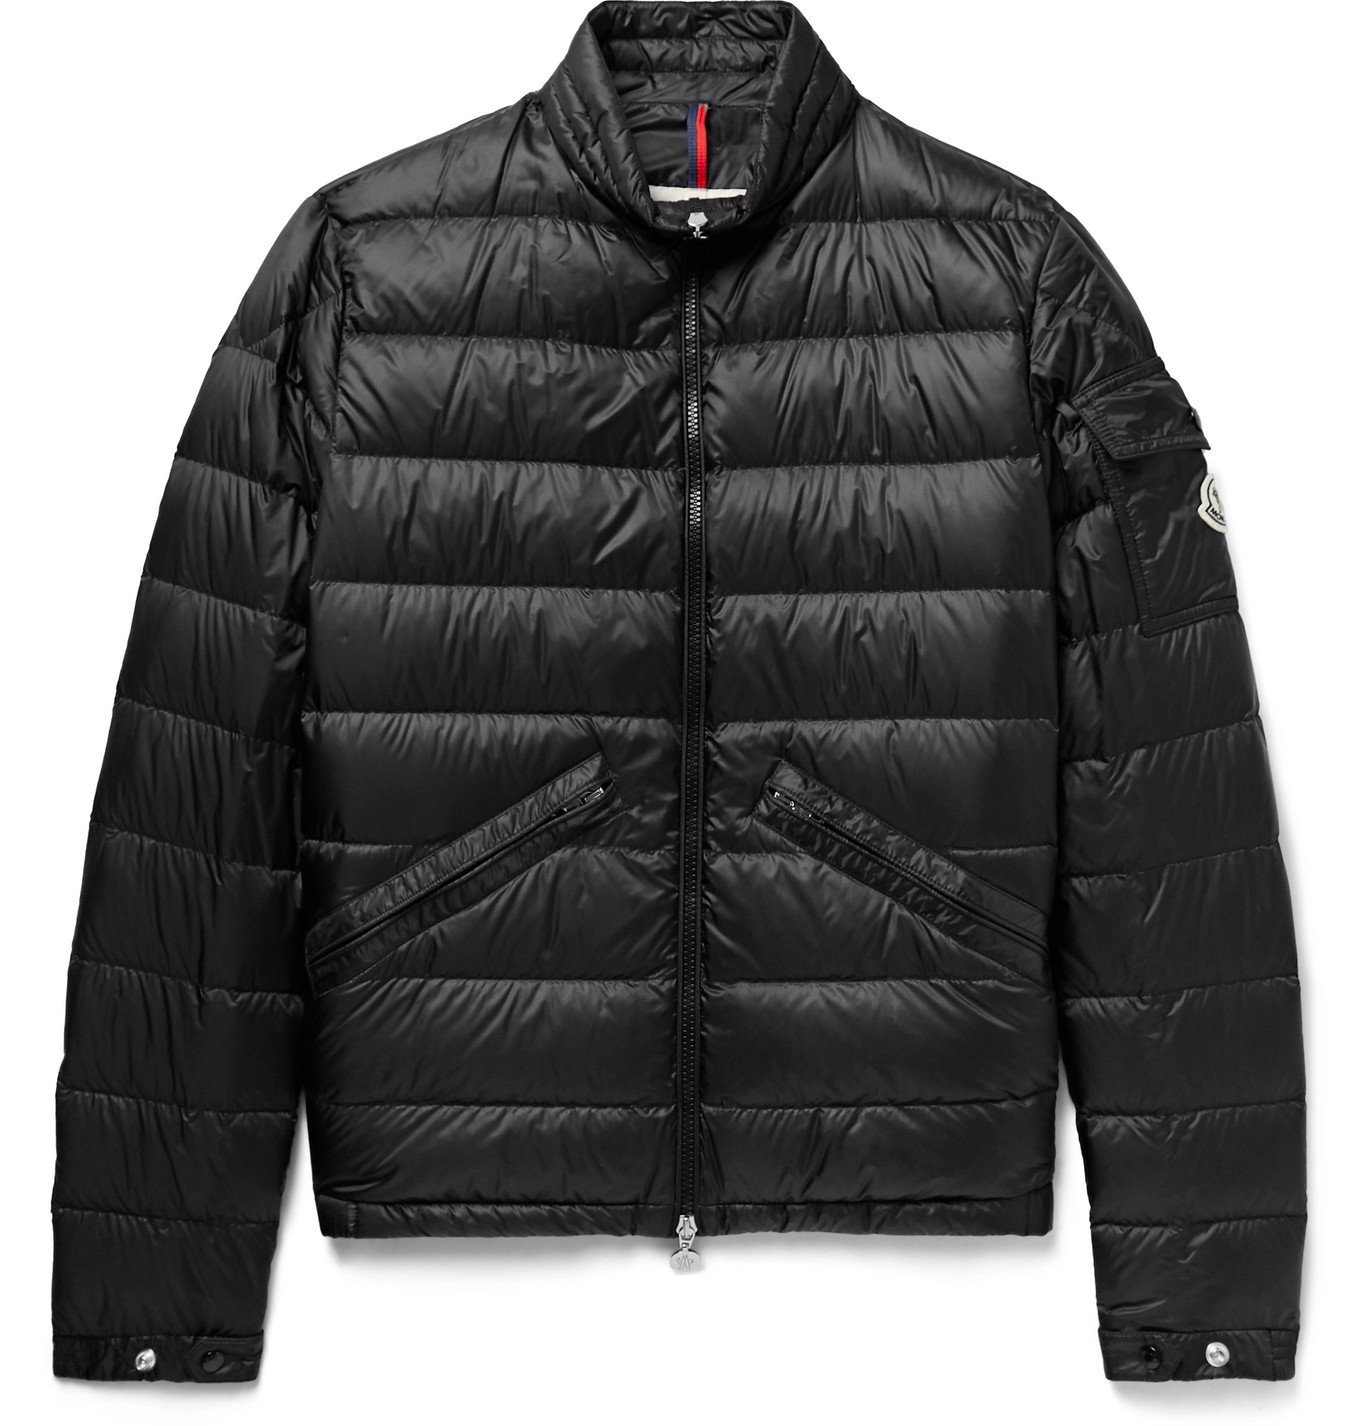 MONCLER - Quilted Shell Down Jacket - Black Moncler